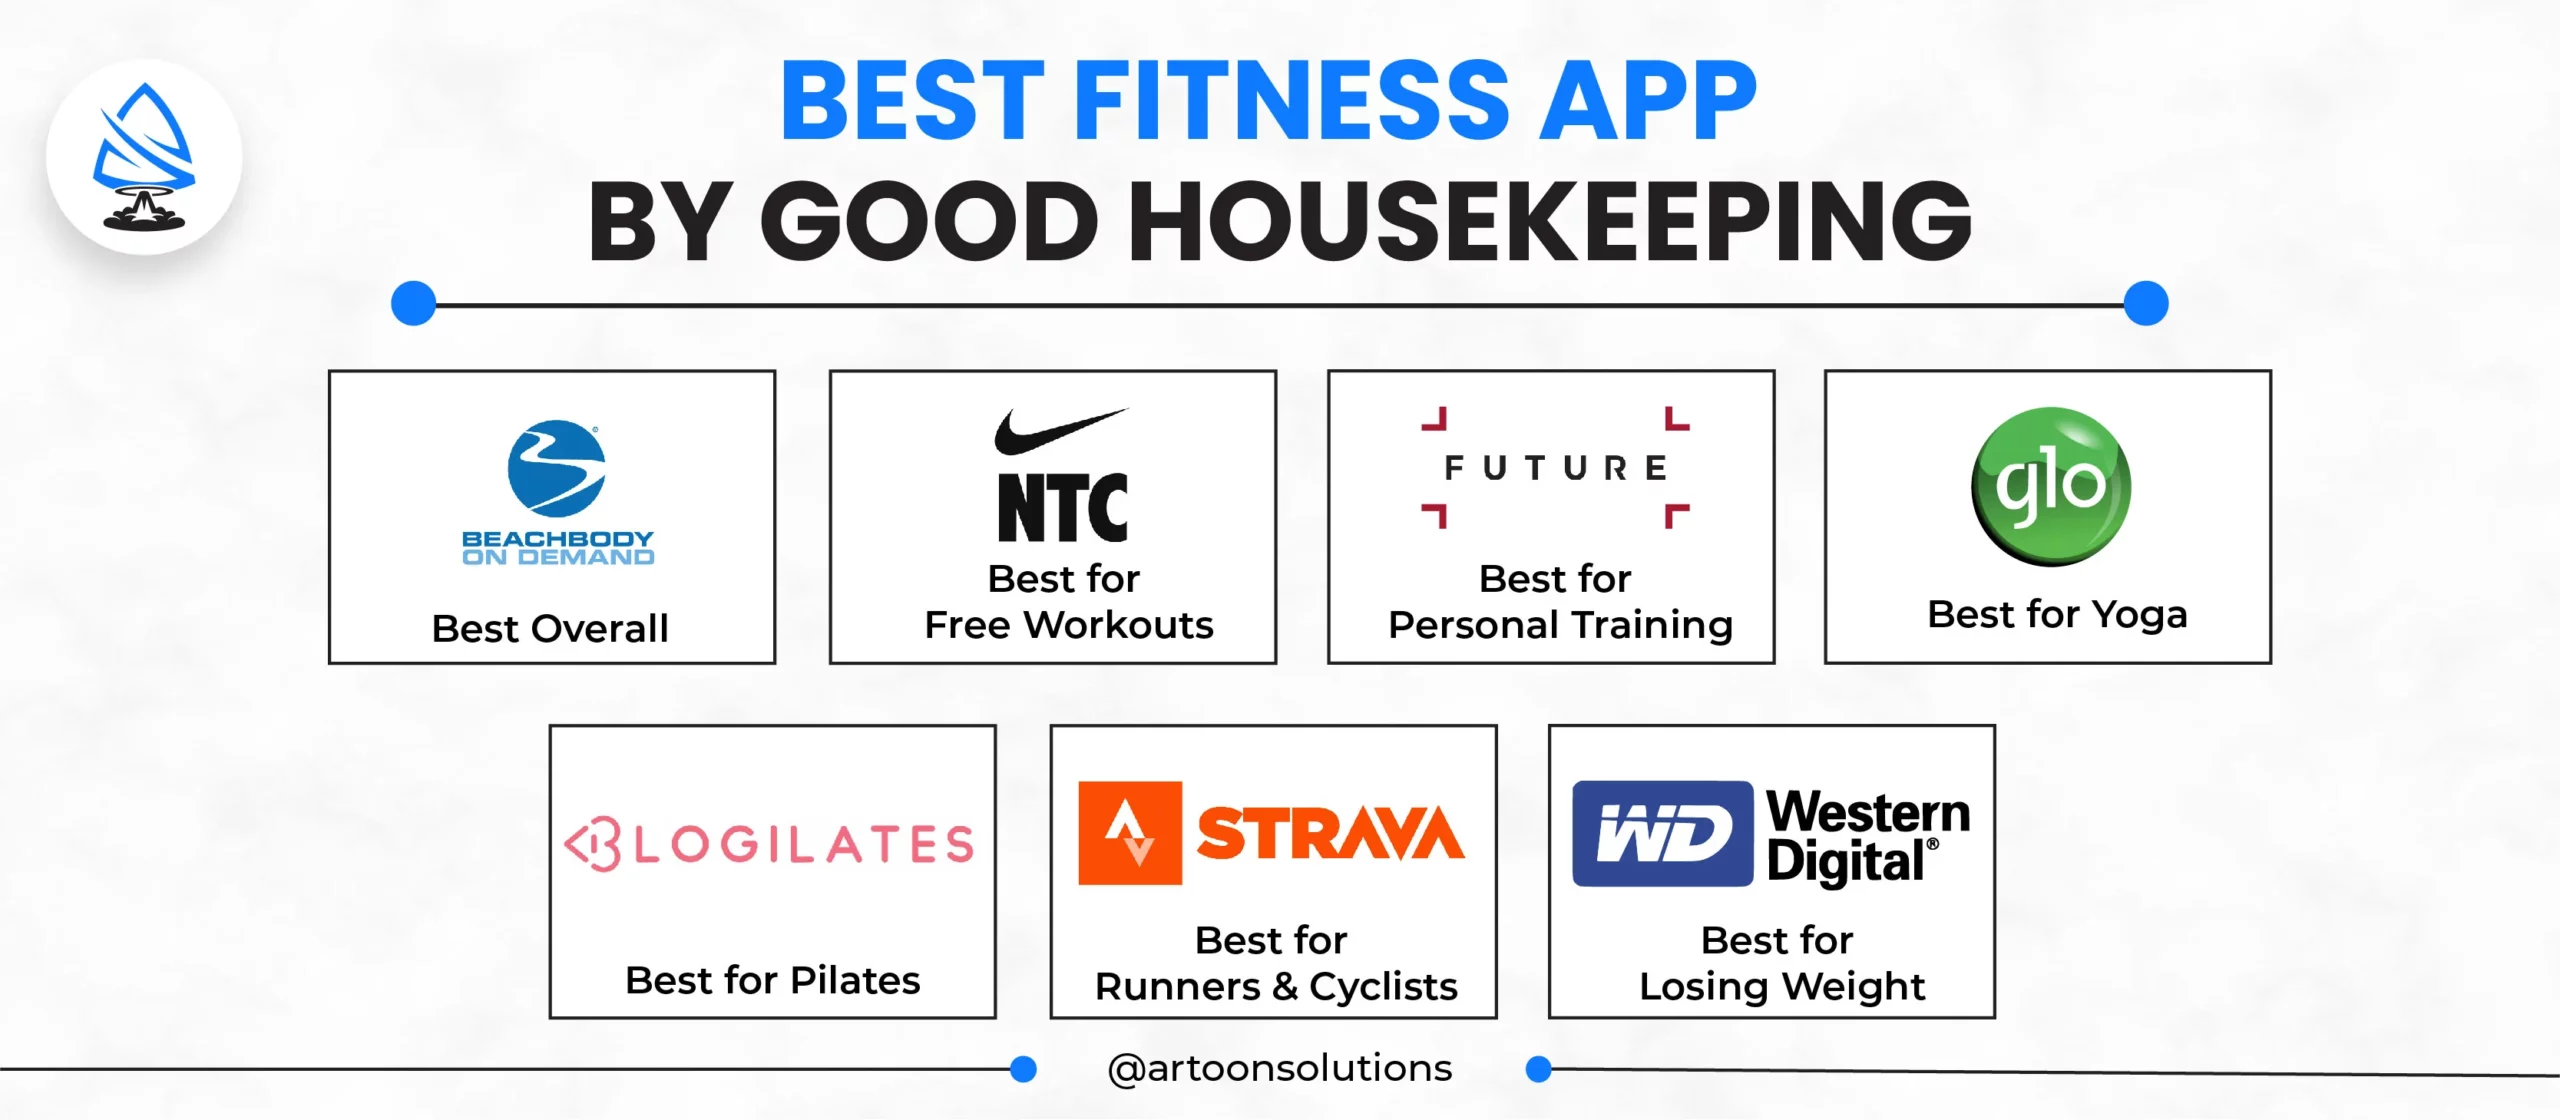 Best Fitness Apps for Good Housekeeping